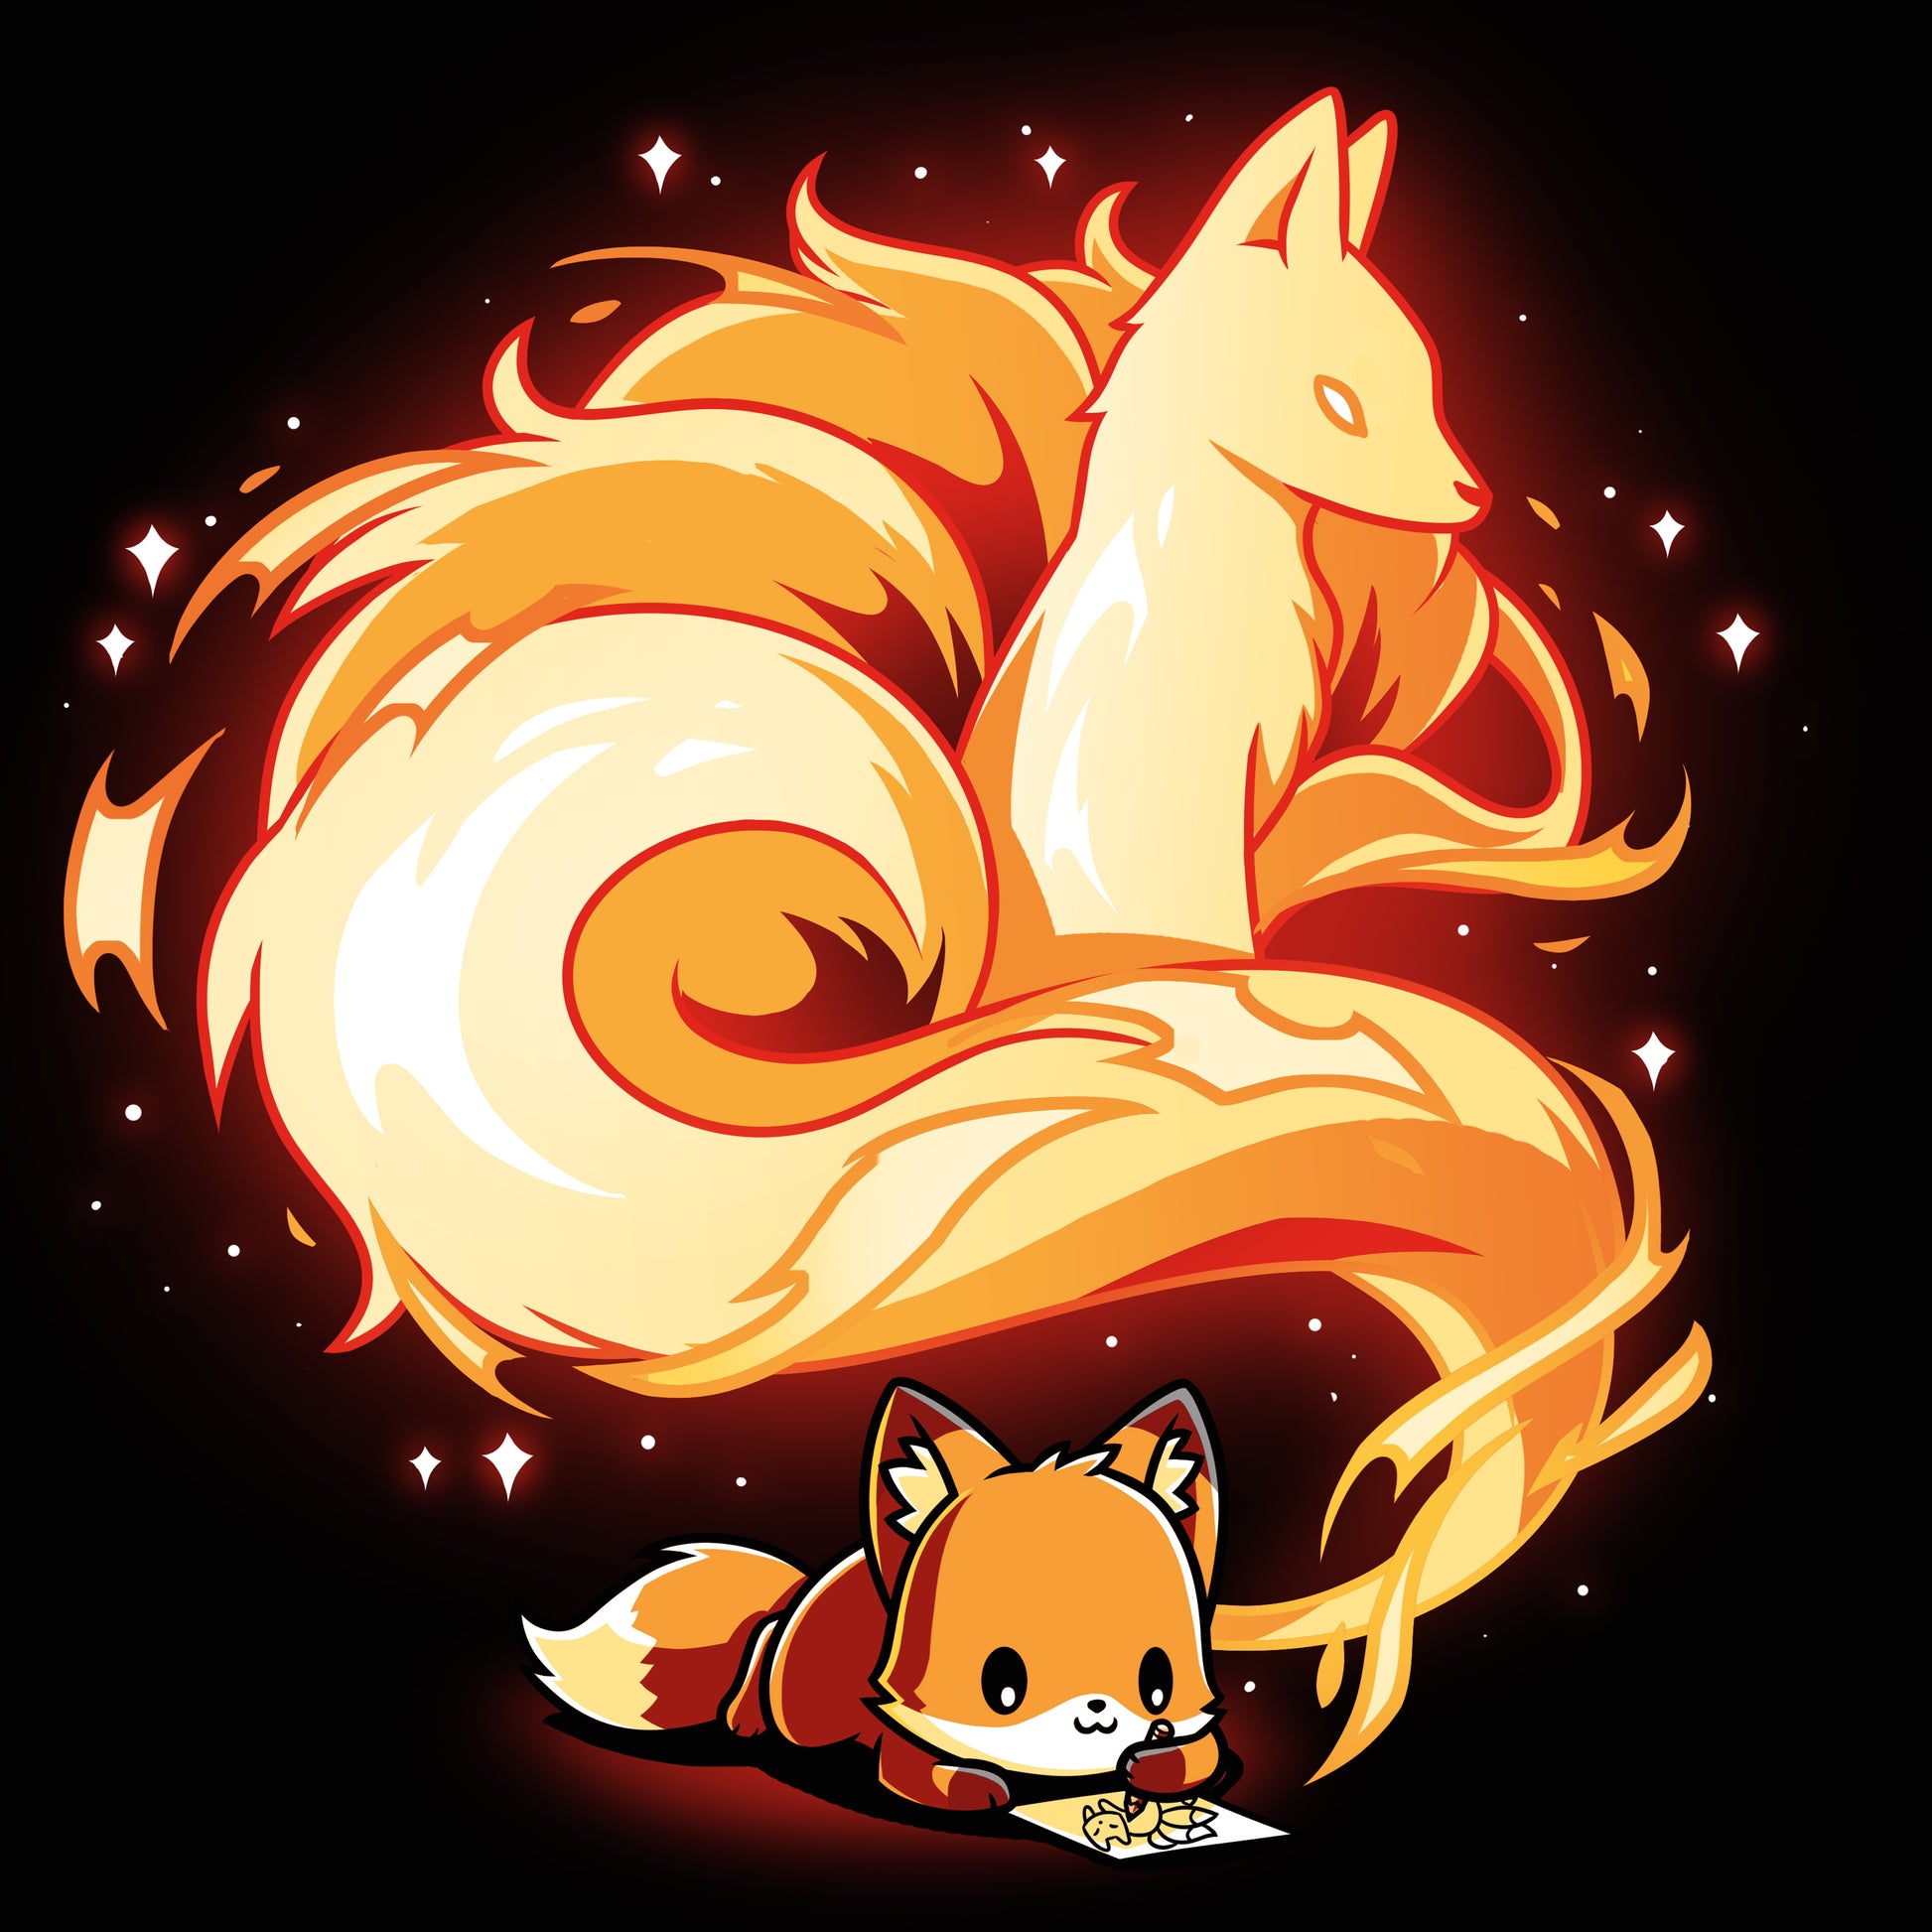 A black TeeTurtle original, The Mind of an Artist, featuring a fox and a cat sitting next to each other.